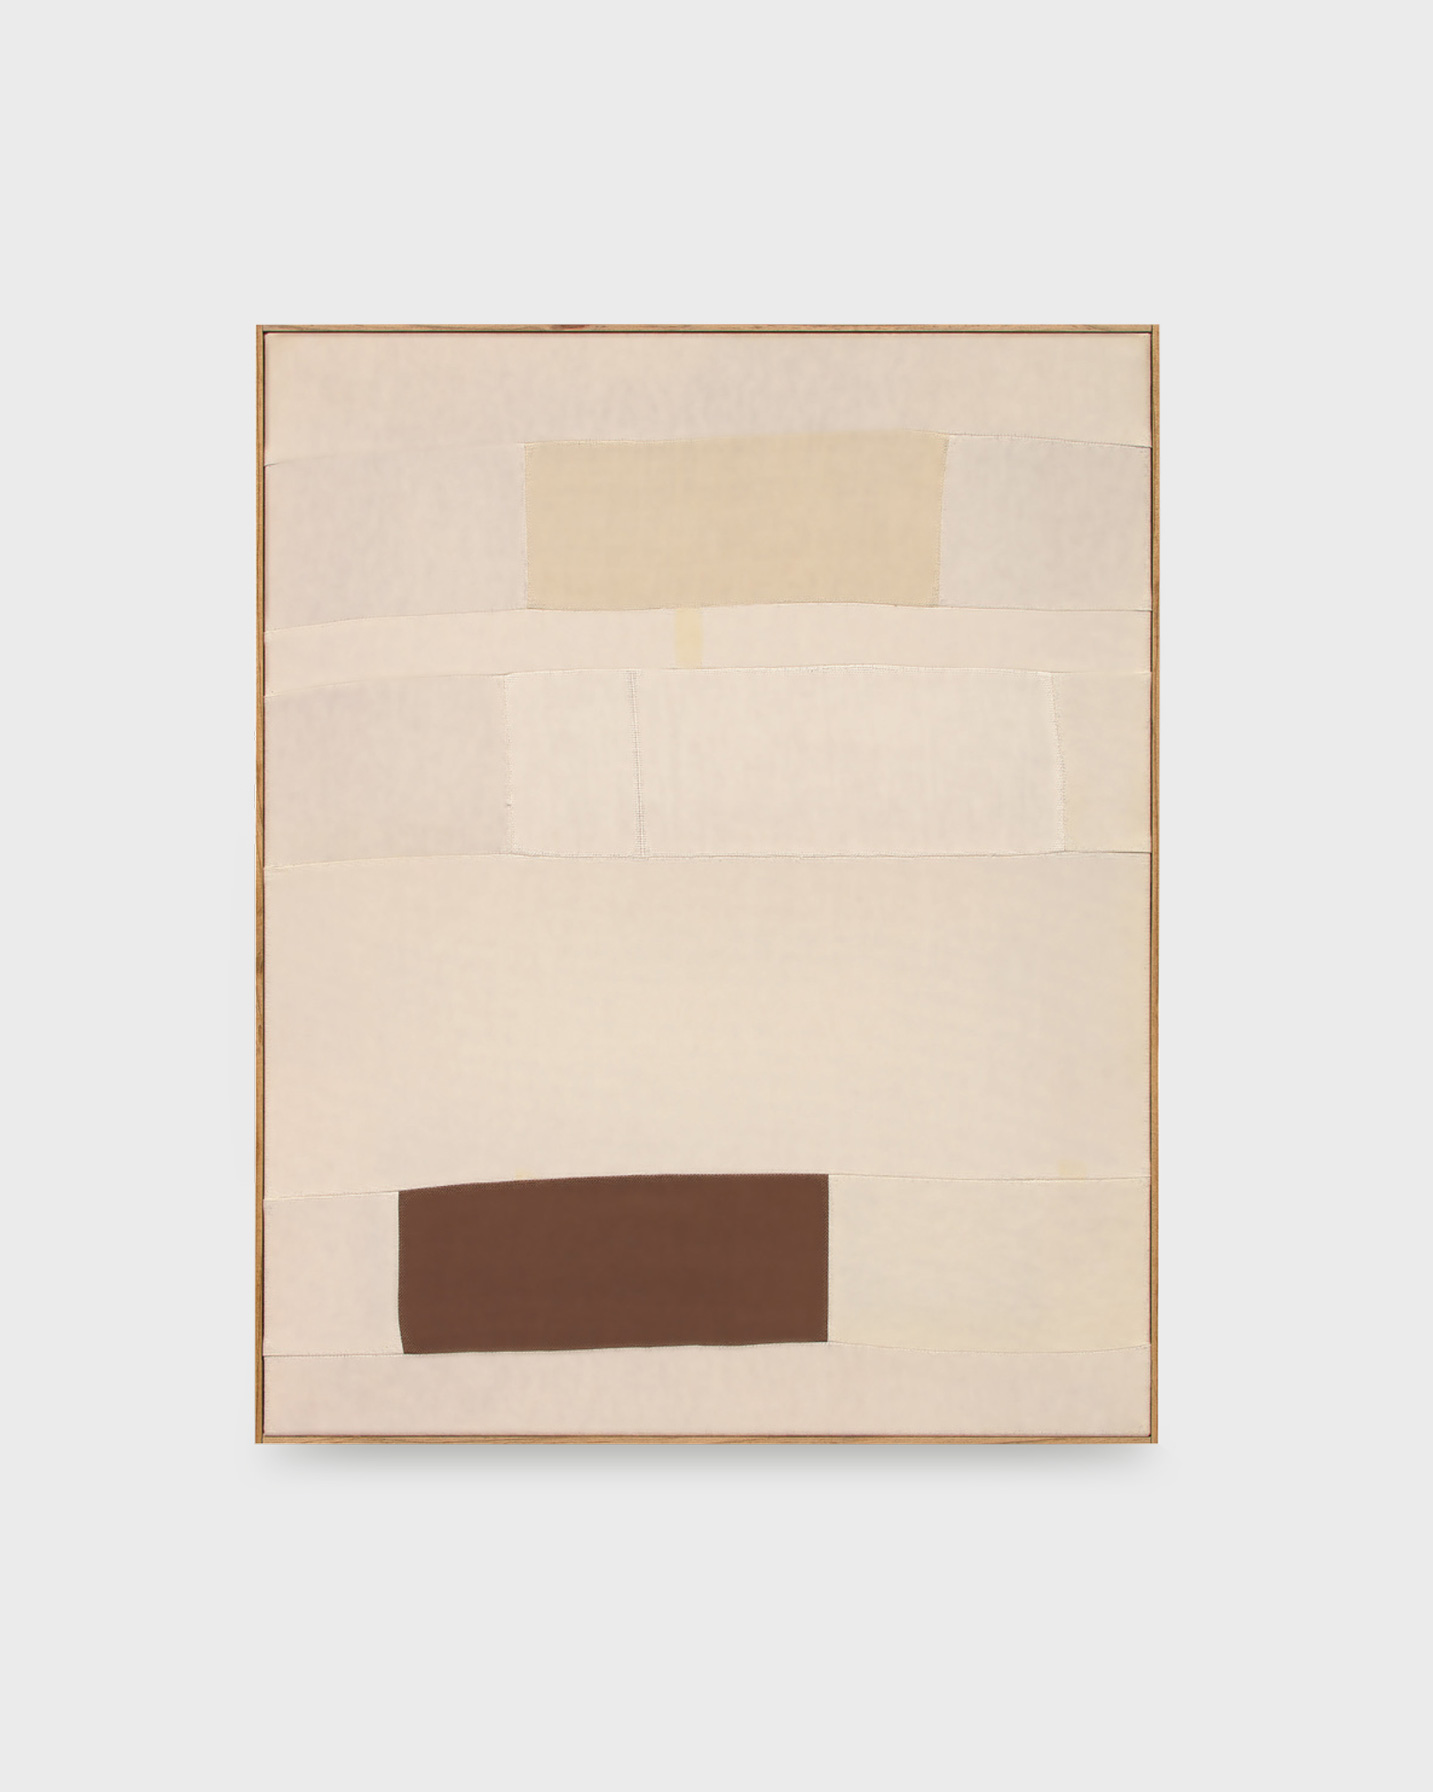 Ethan Cook, Untitled, 2013, Handwoven cotton canvas and canvas, in artist's frame, 76.2 × 61 cm © The Artist, Image Courtesy Philips